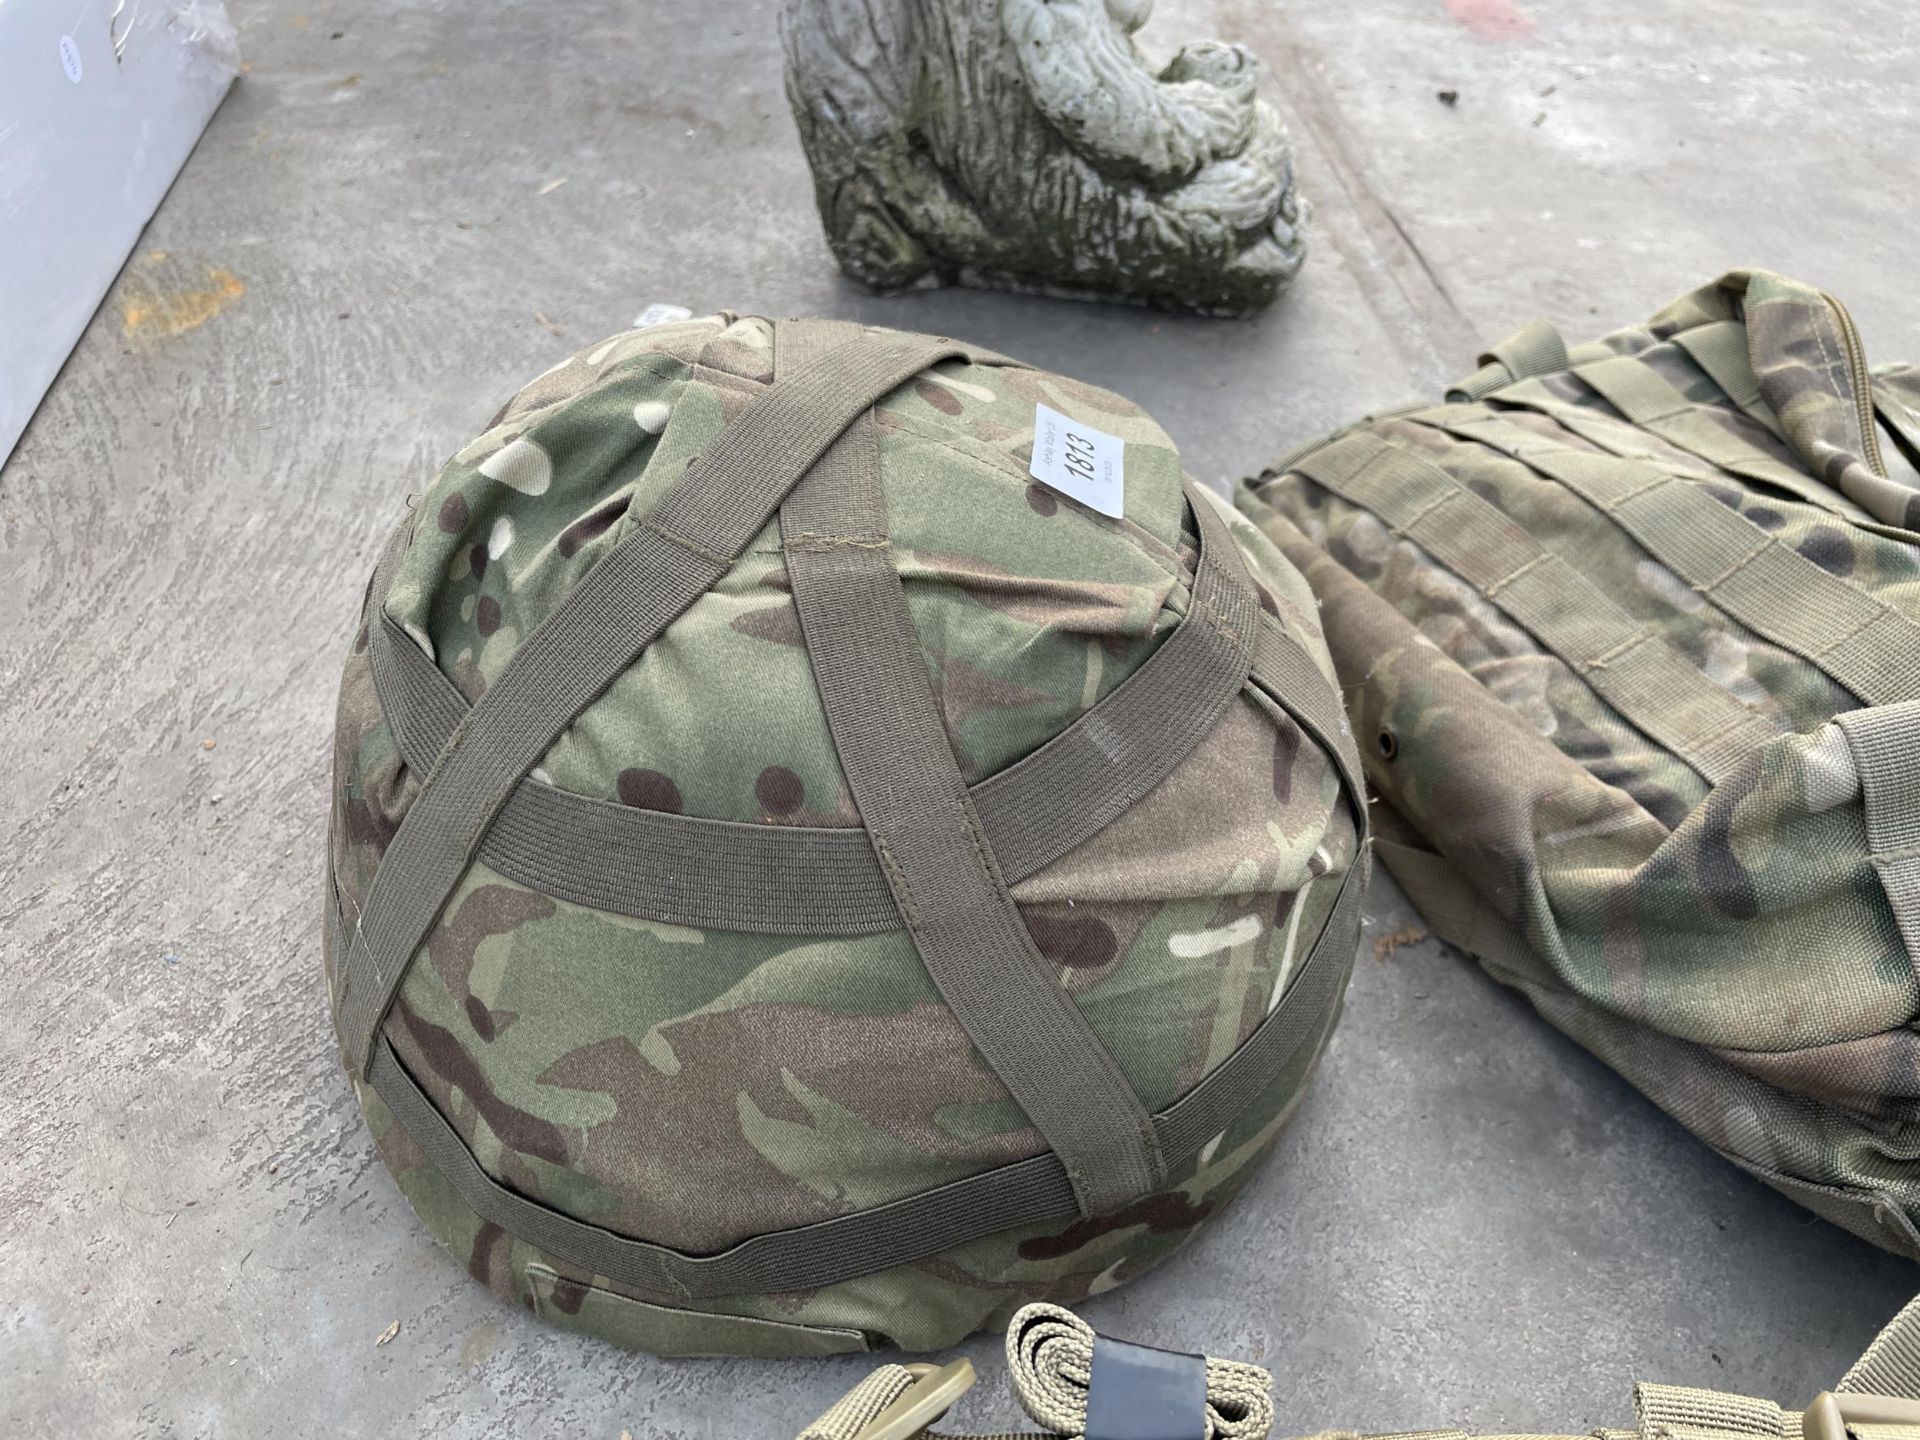 TWO CAMMO BAGS AND A CAMMO HELMET - Image 2 of 3